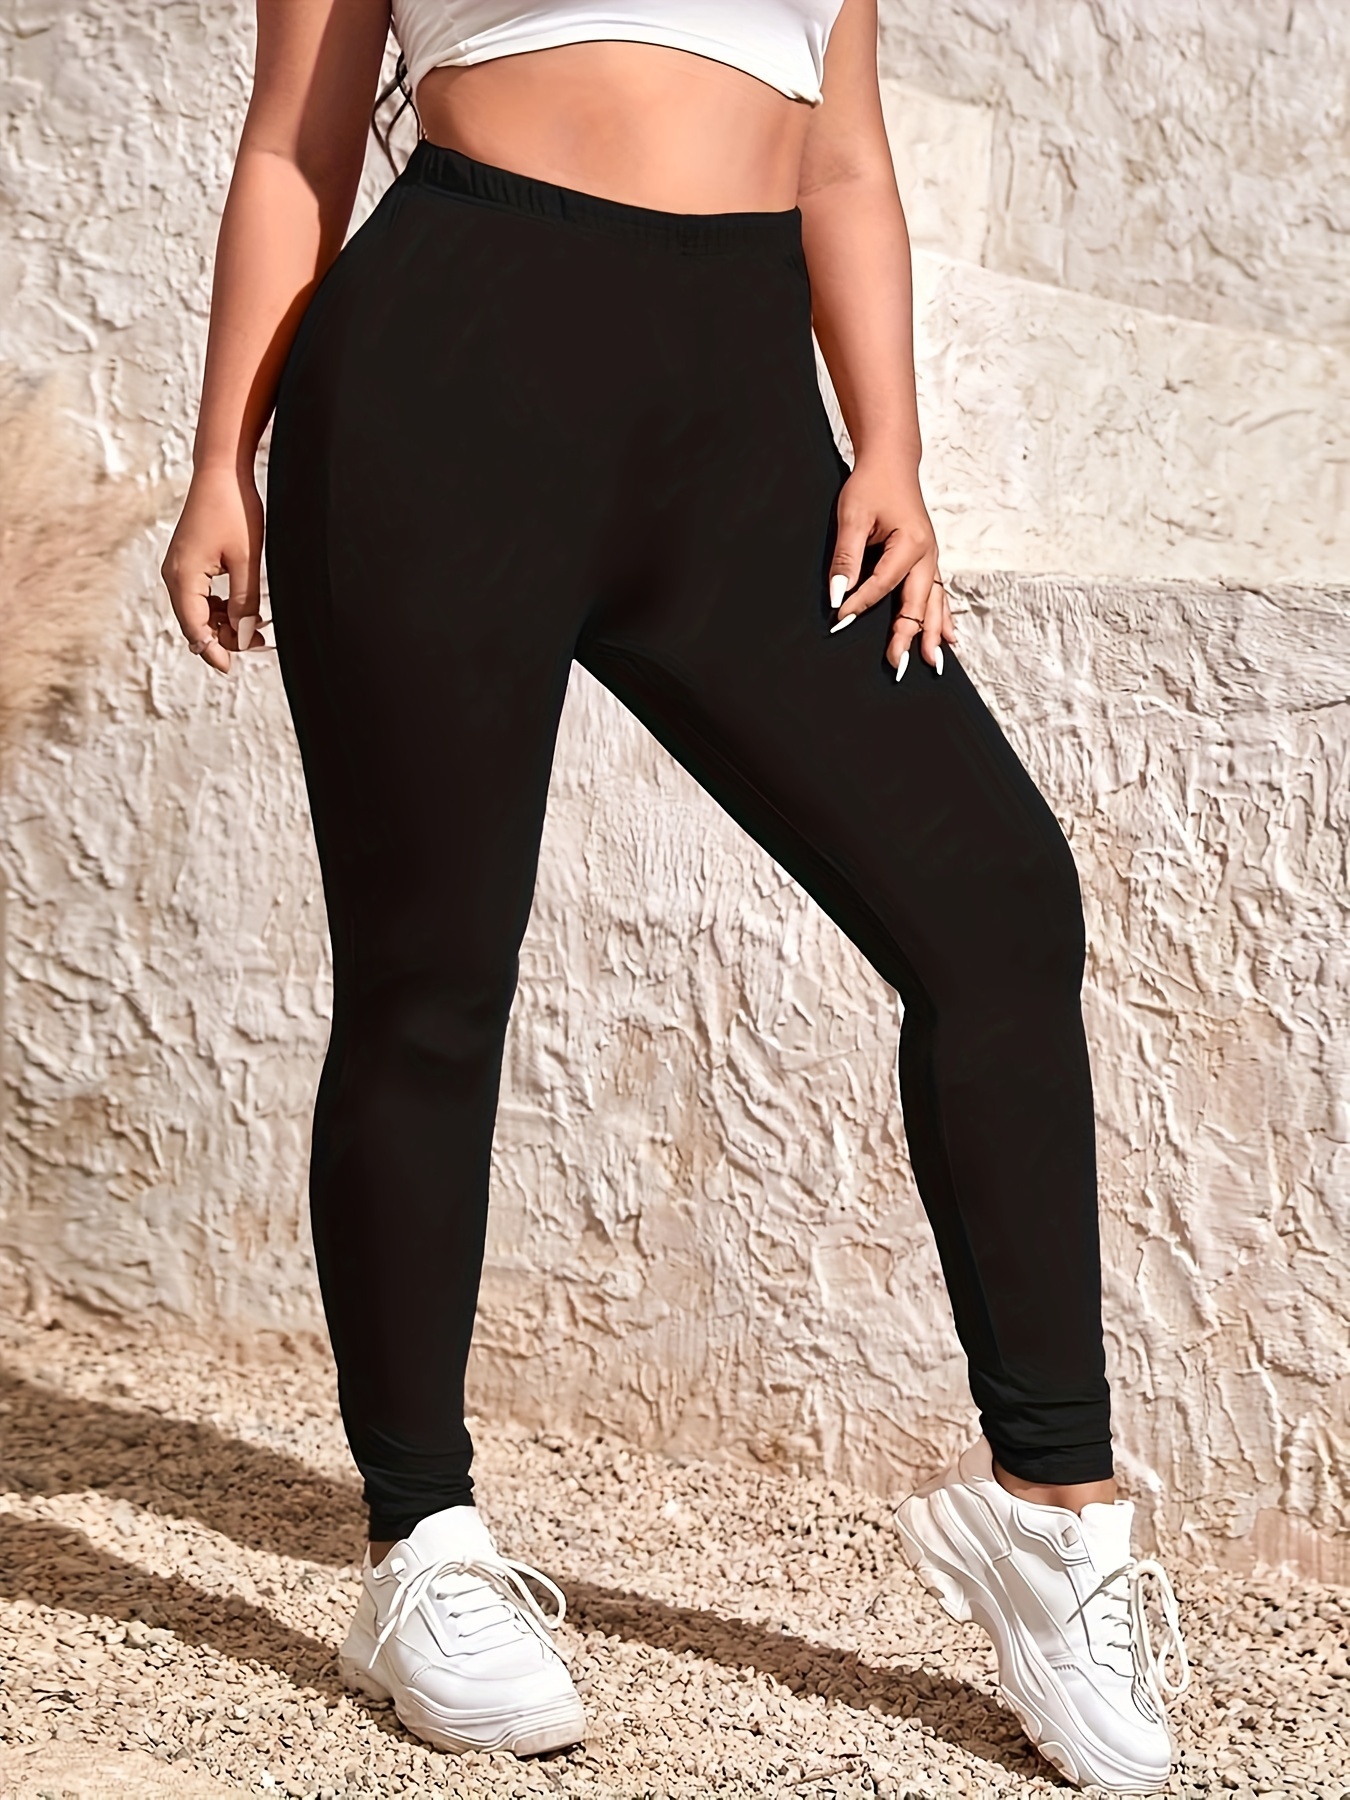 Sales Today Clearance Yoga Pants Black Tummy Control Leggings Leggings Plus  Size Tummy Control Athleisure Pants for Women Deals of The Day Pants for  Women Trendy Pantalones Mujer at  Women's Clothing